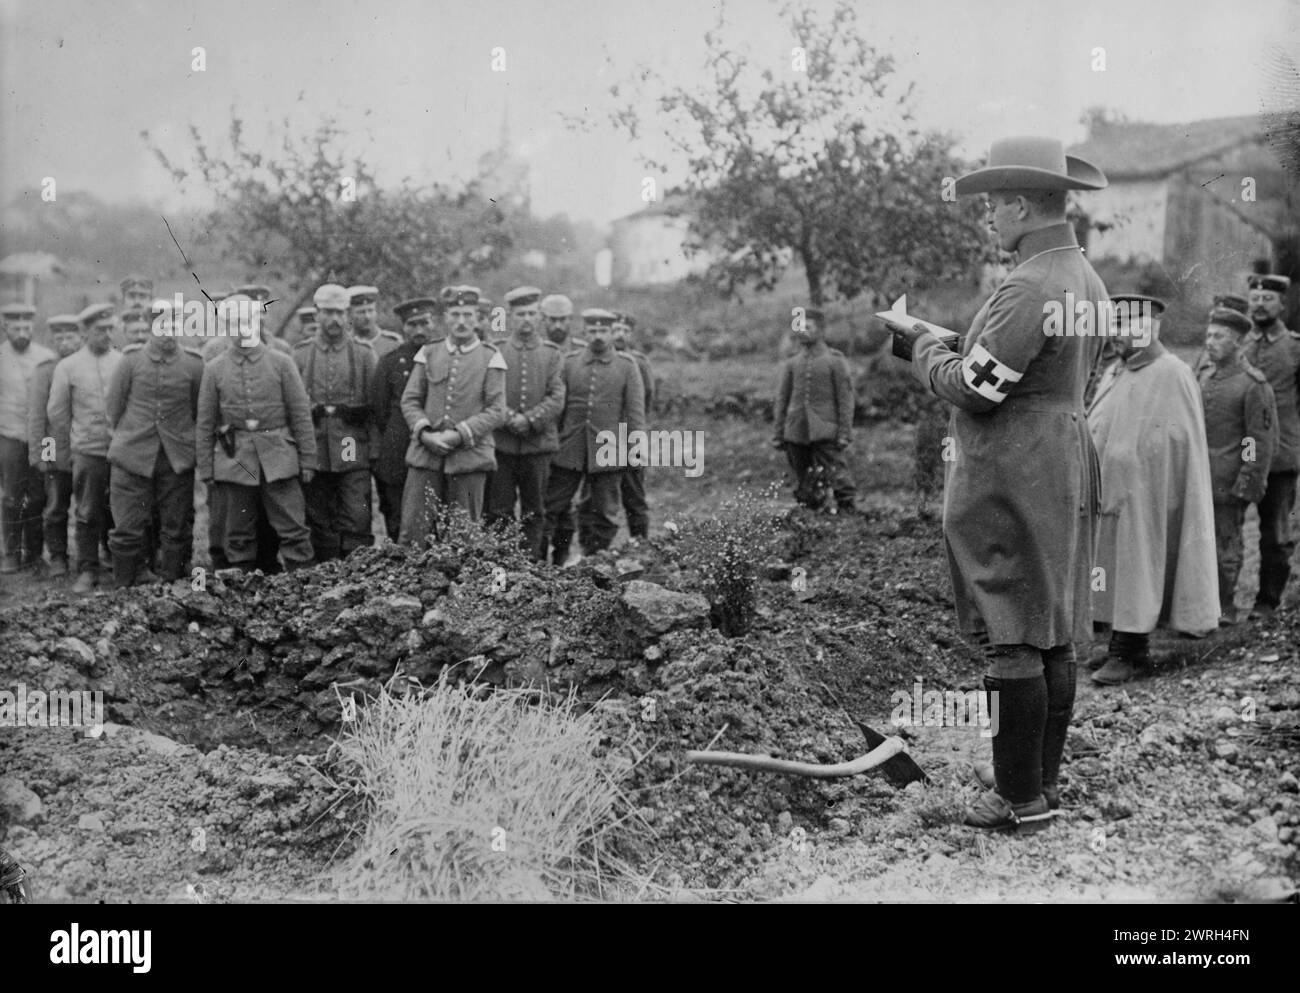 German Field chaplain burying French Officer who died in hospital, 1914. German chaplain standing next to a grave with other men, during World War I. Stock Photo